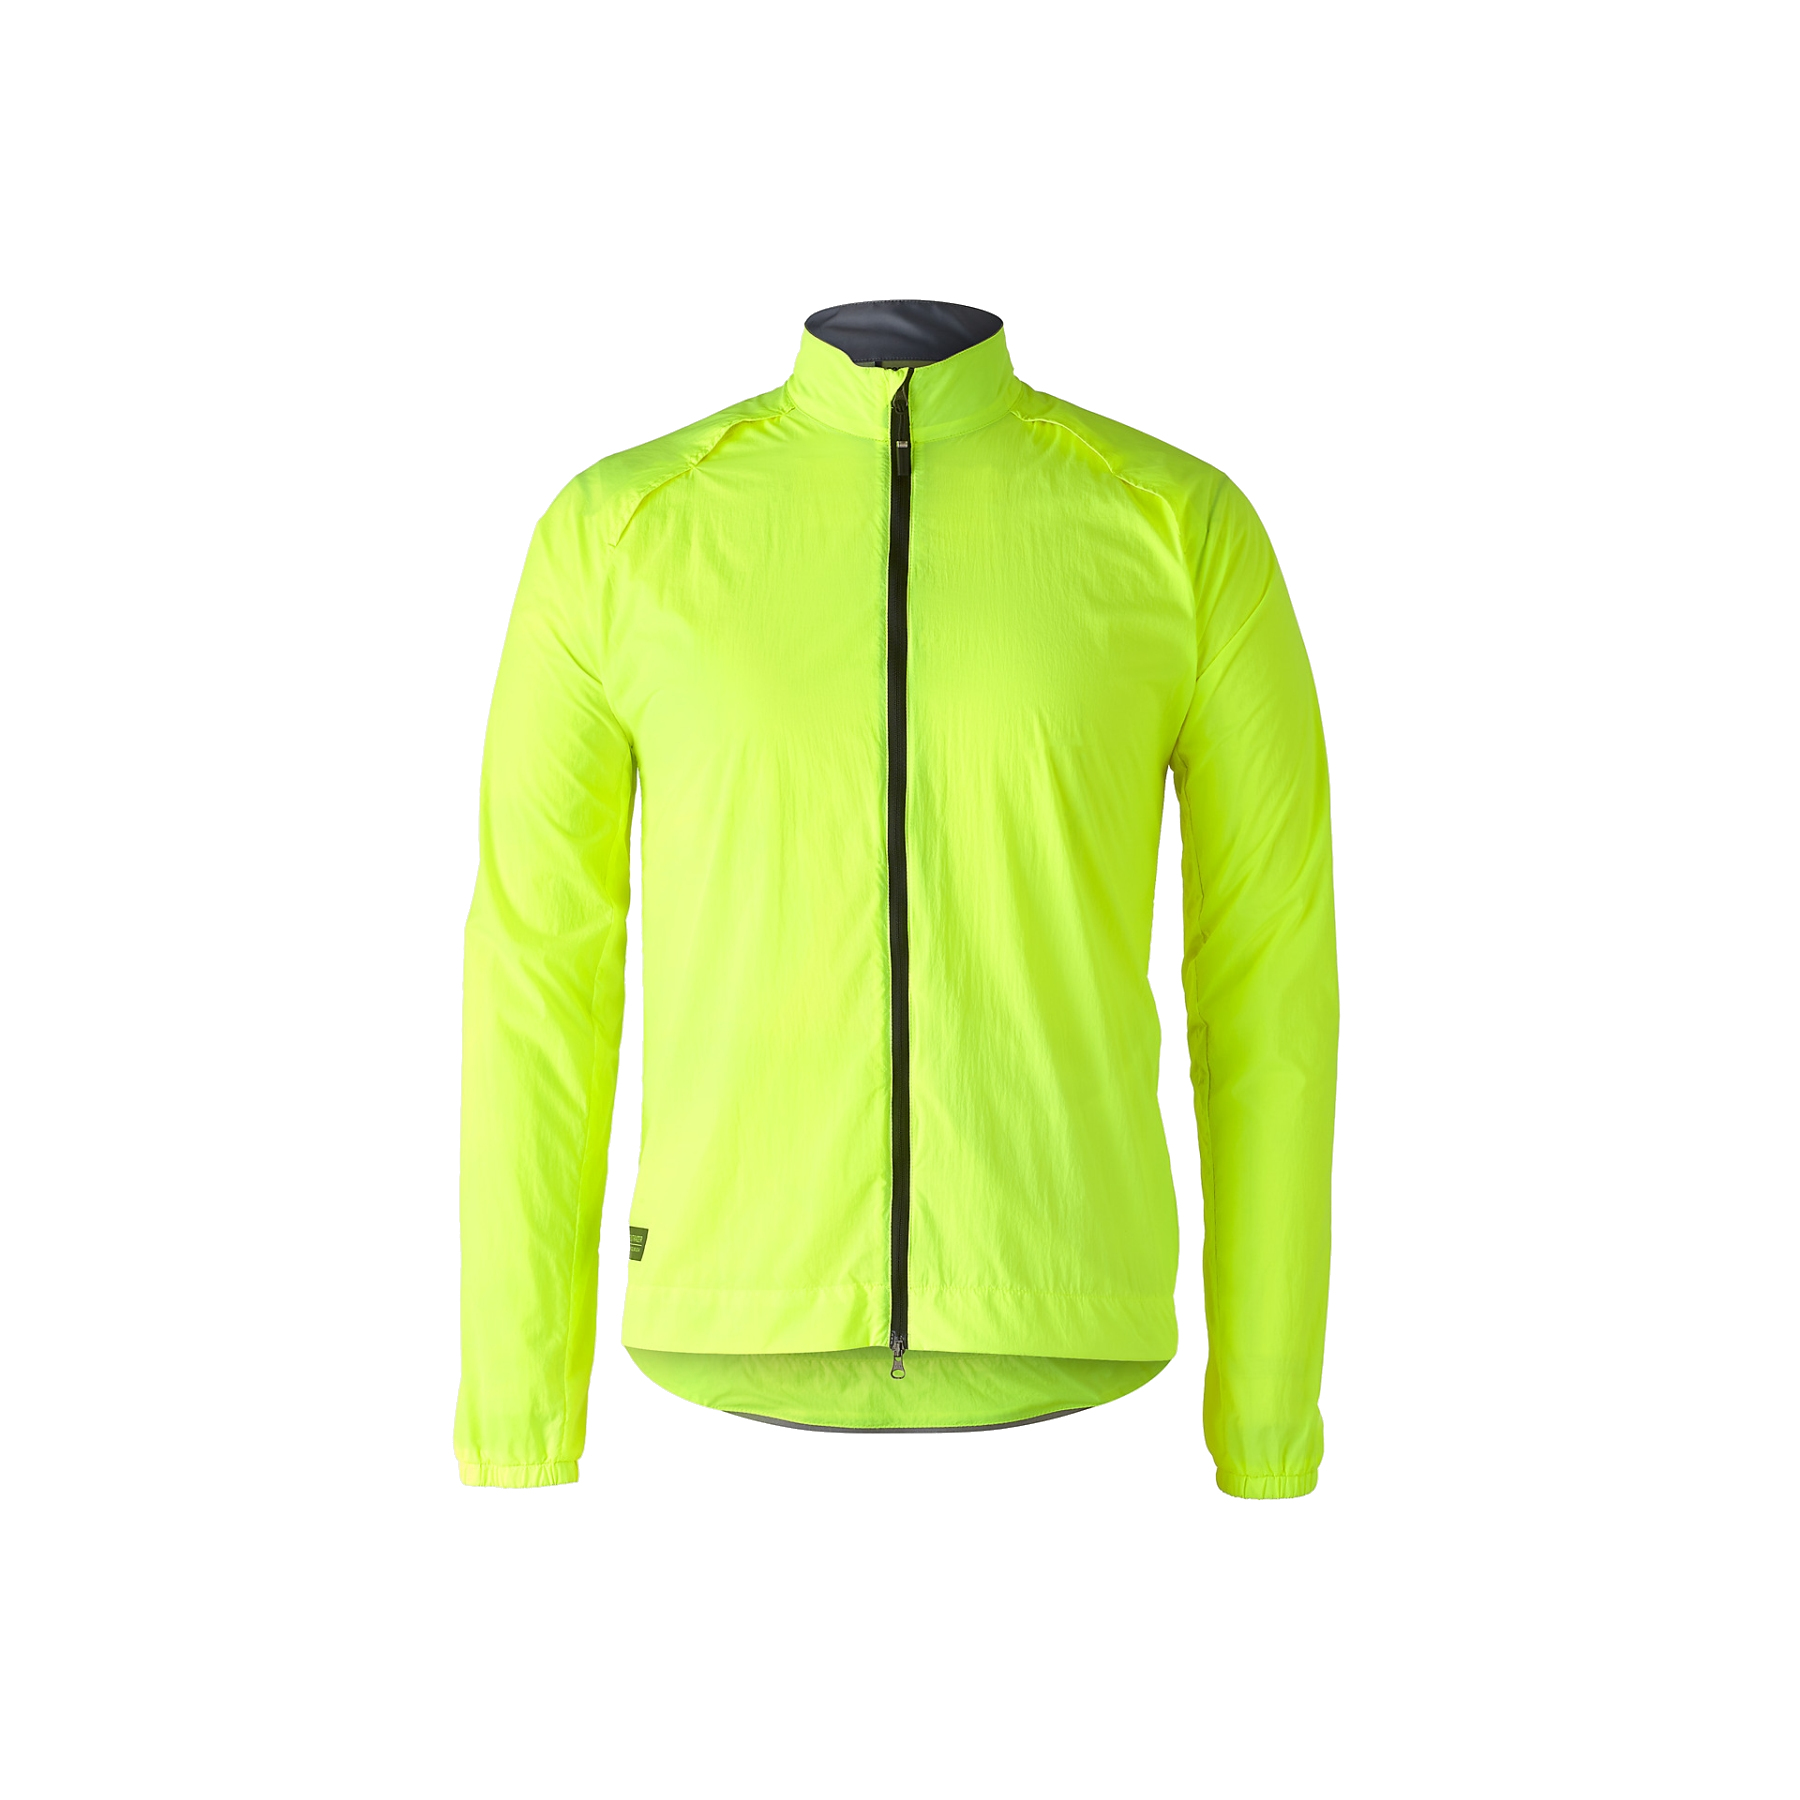 Picture of Bontrager Circuit Wind Jacket - radioactive yellow